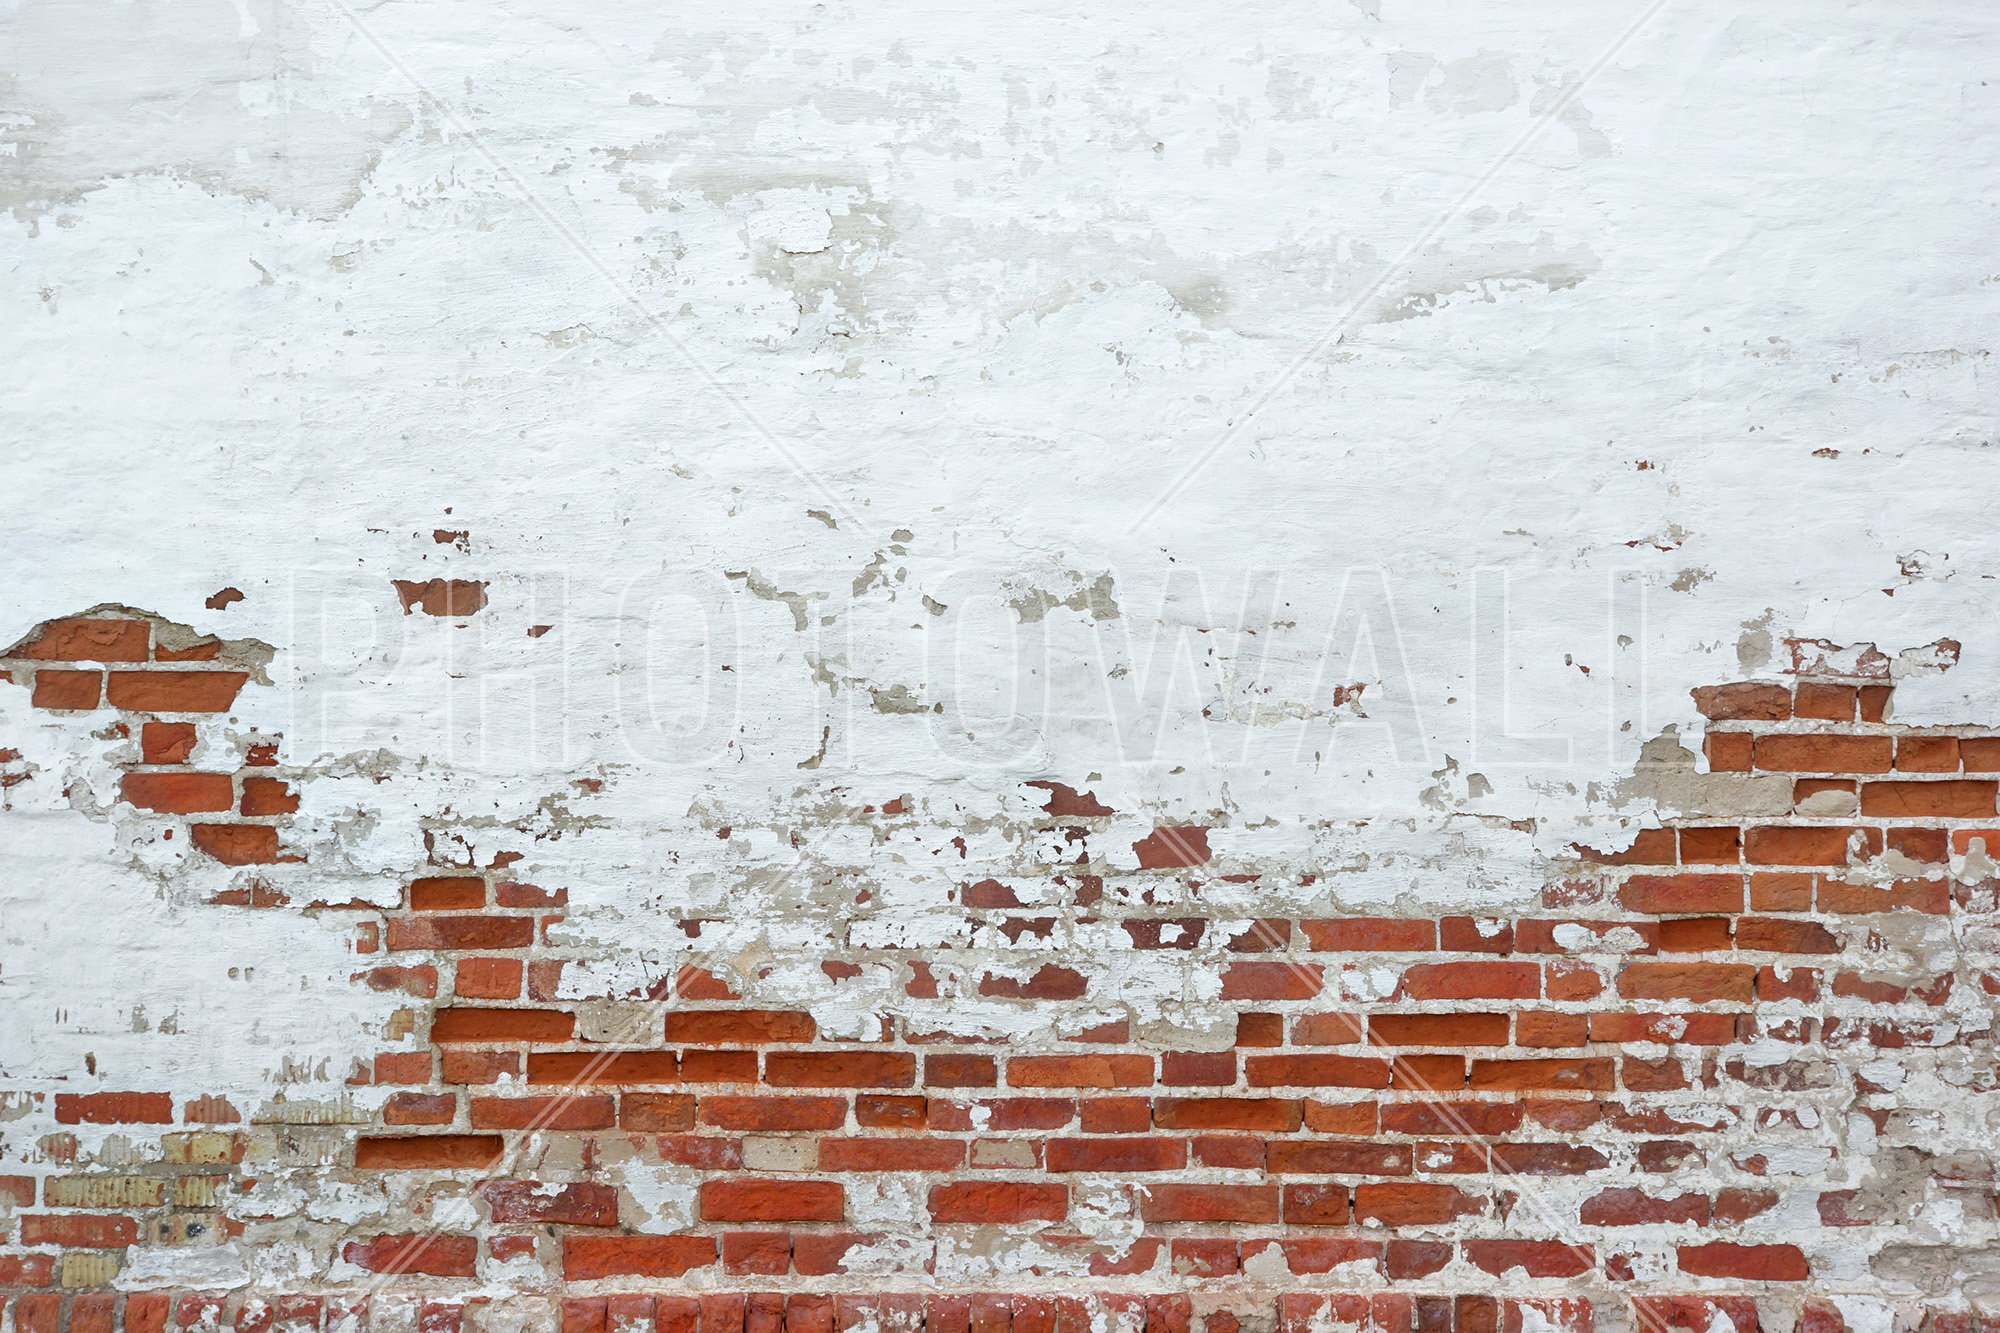 Sprinkled White Plaster On Red Brick Wall - Brick Wall With Plaster - HD Wallpaper 